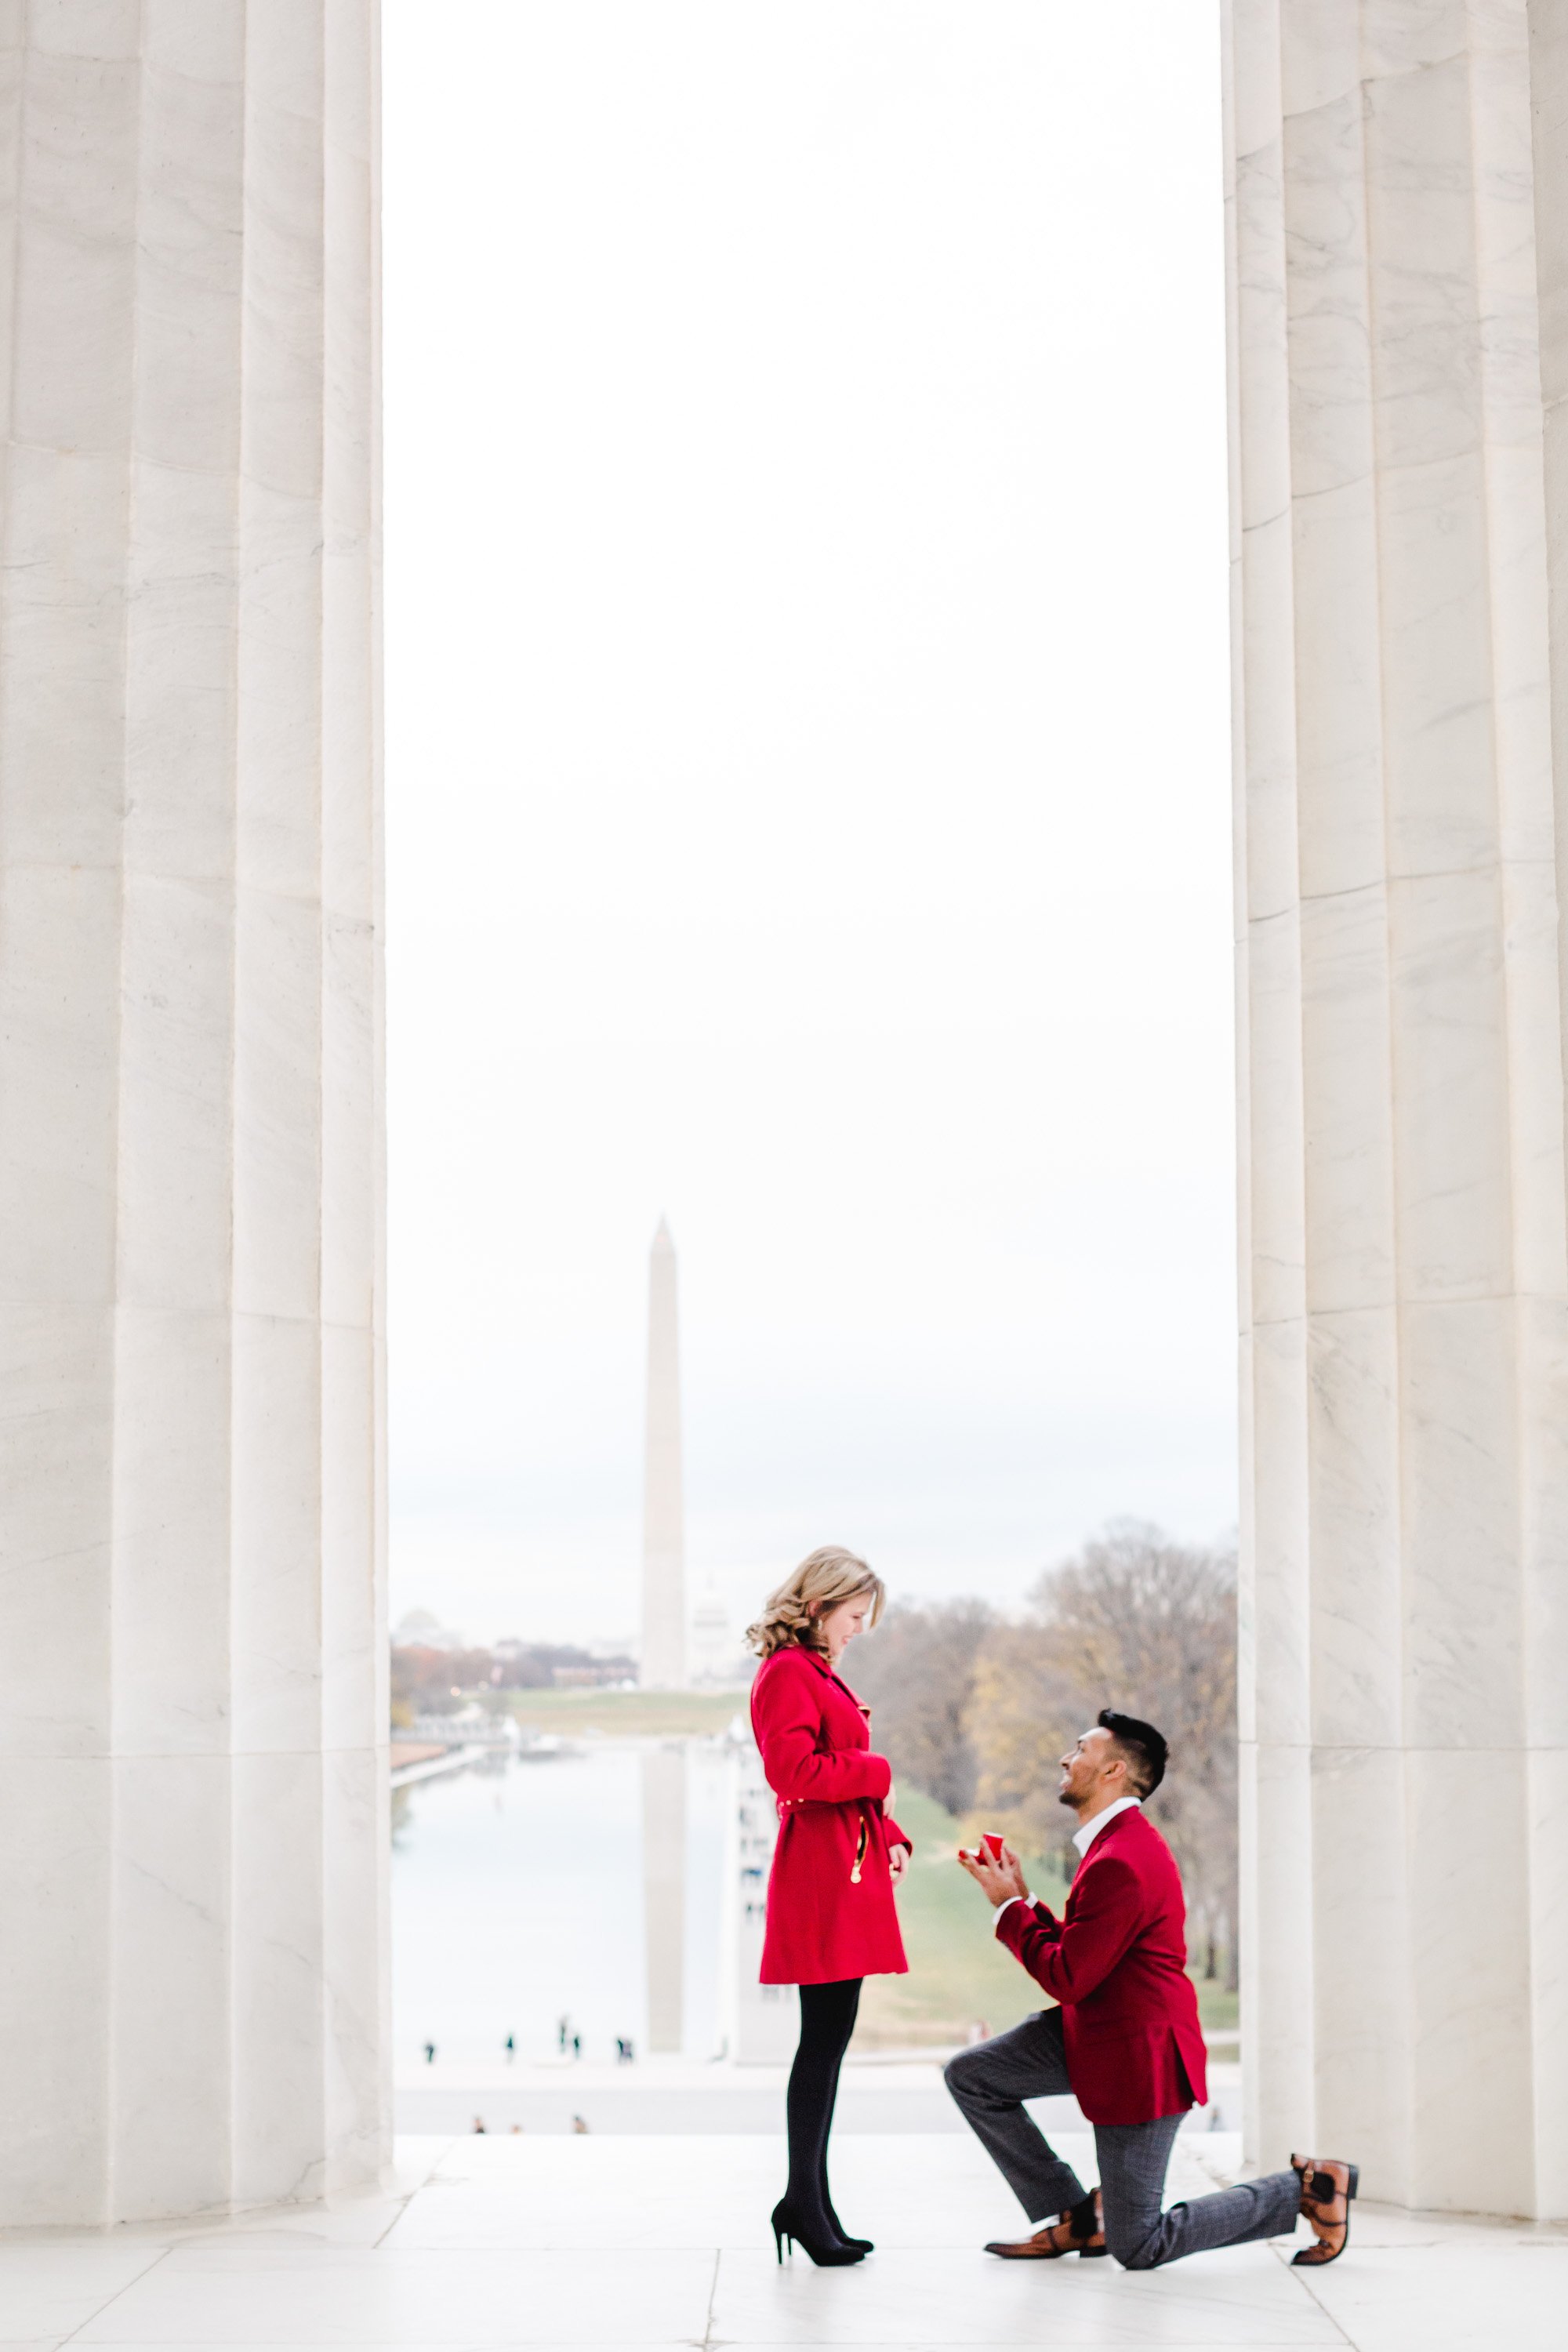 The Best Places to Propose in DC, According to DC-Area Photographers